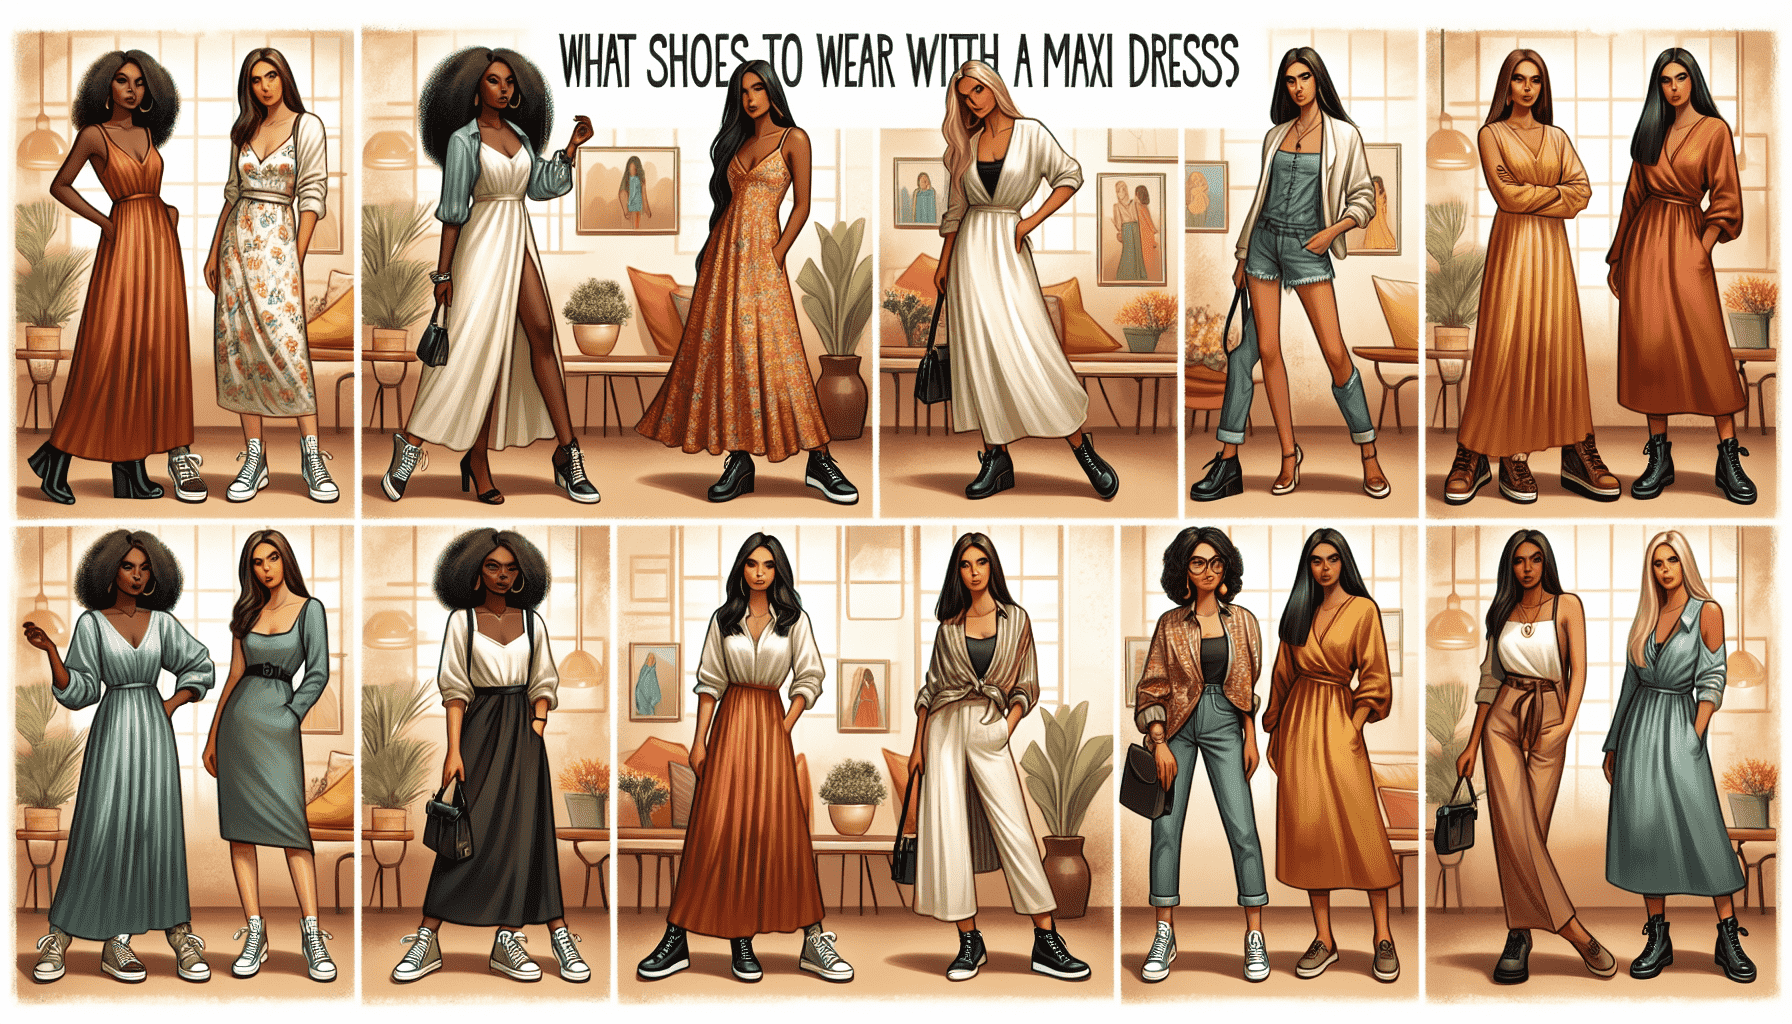 What shoes to wear with a maxi dress